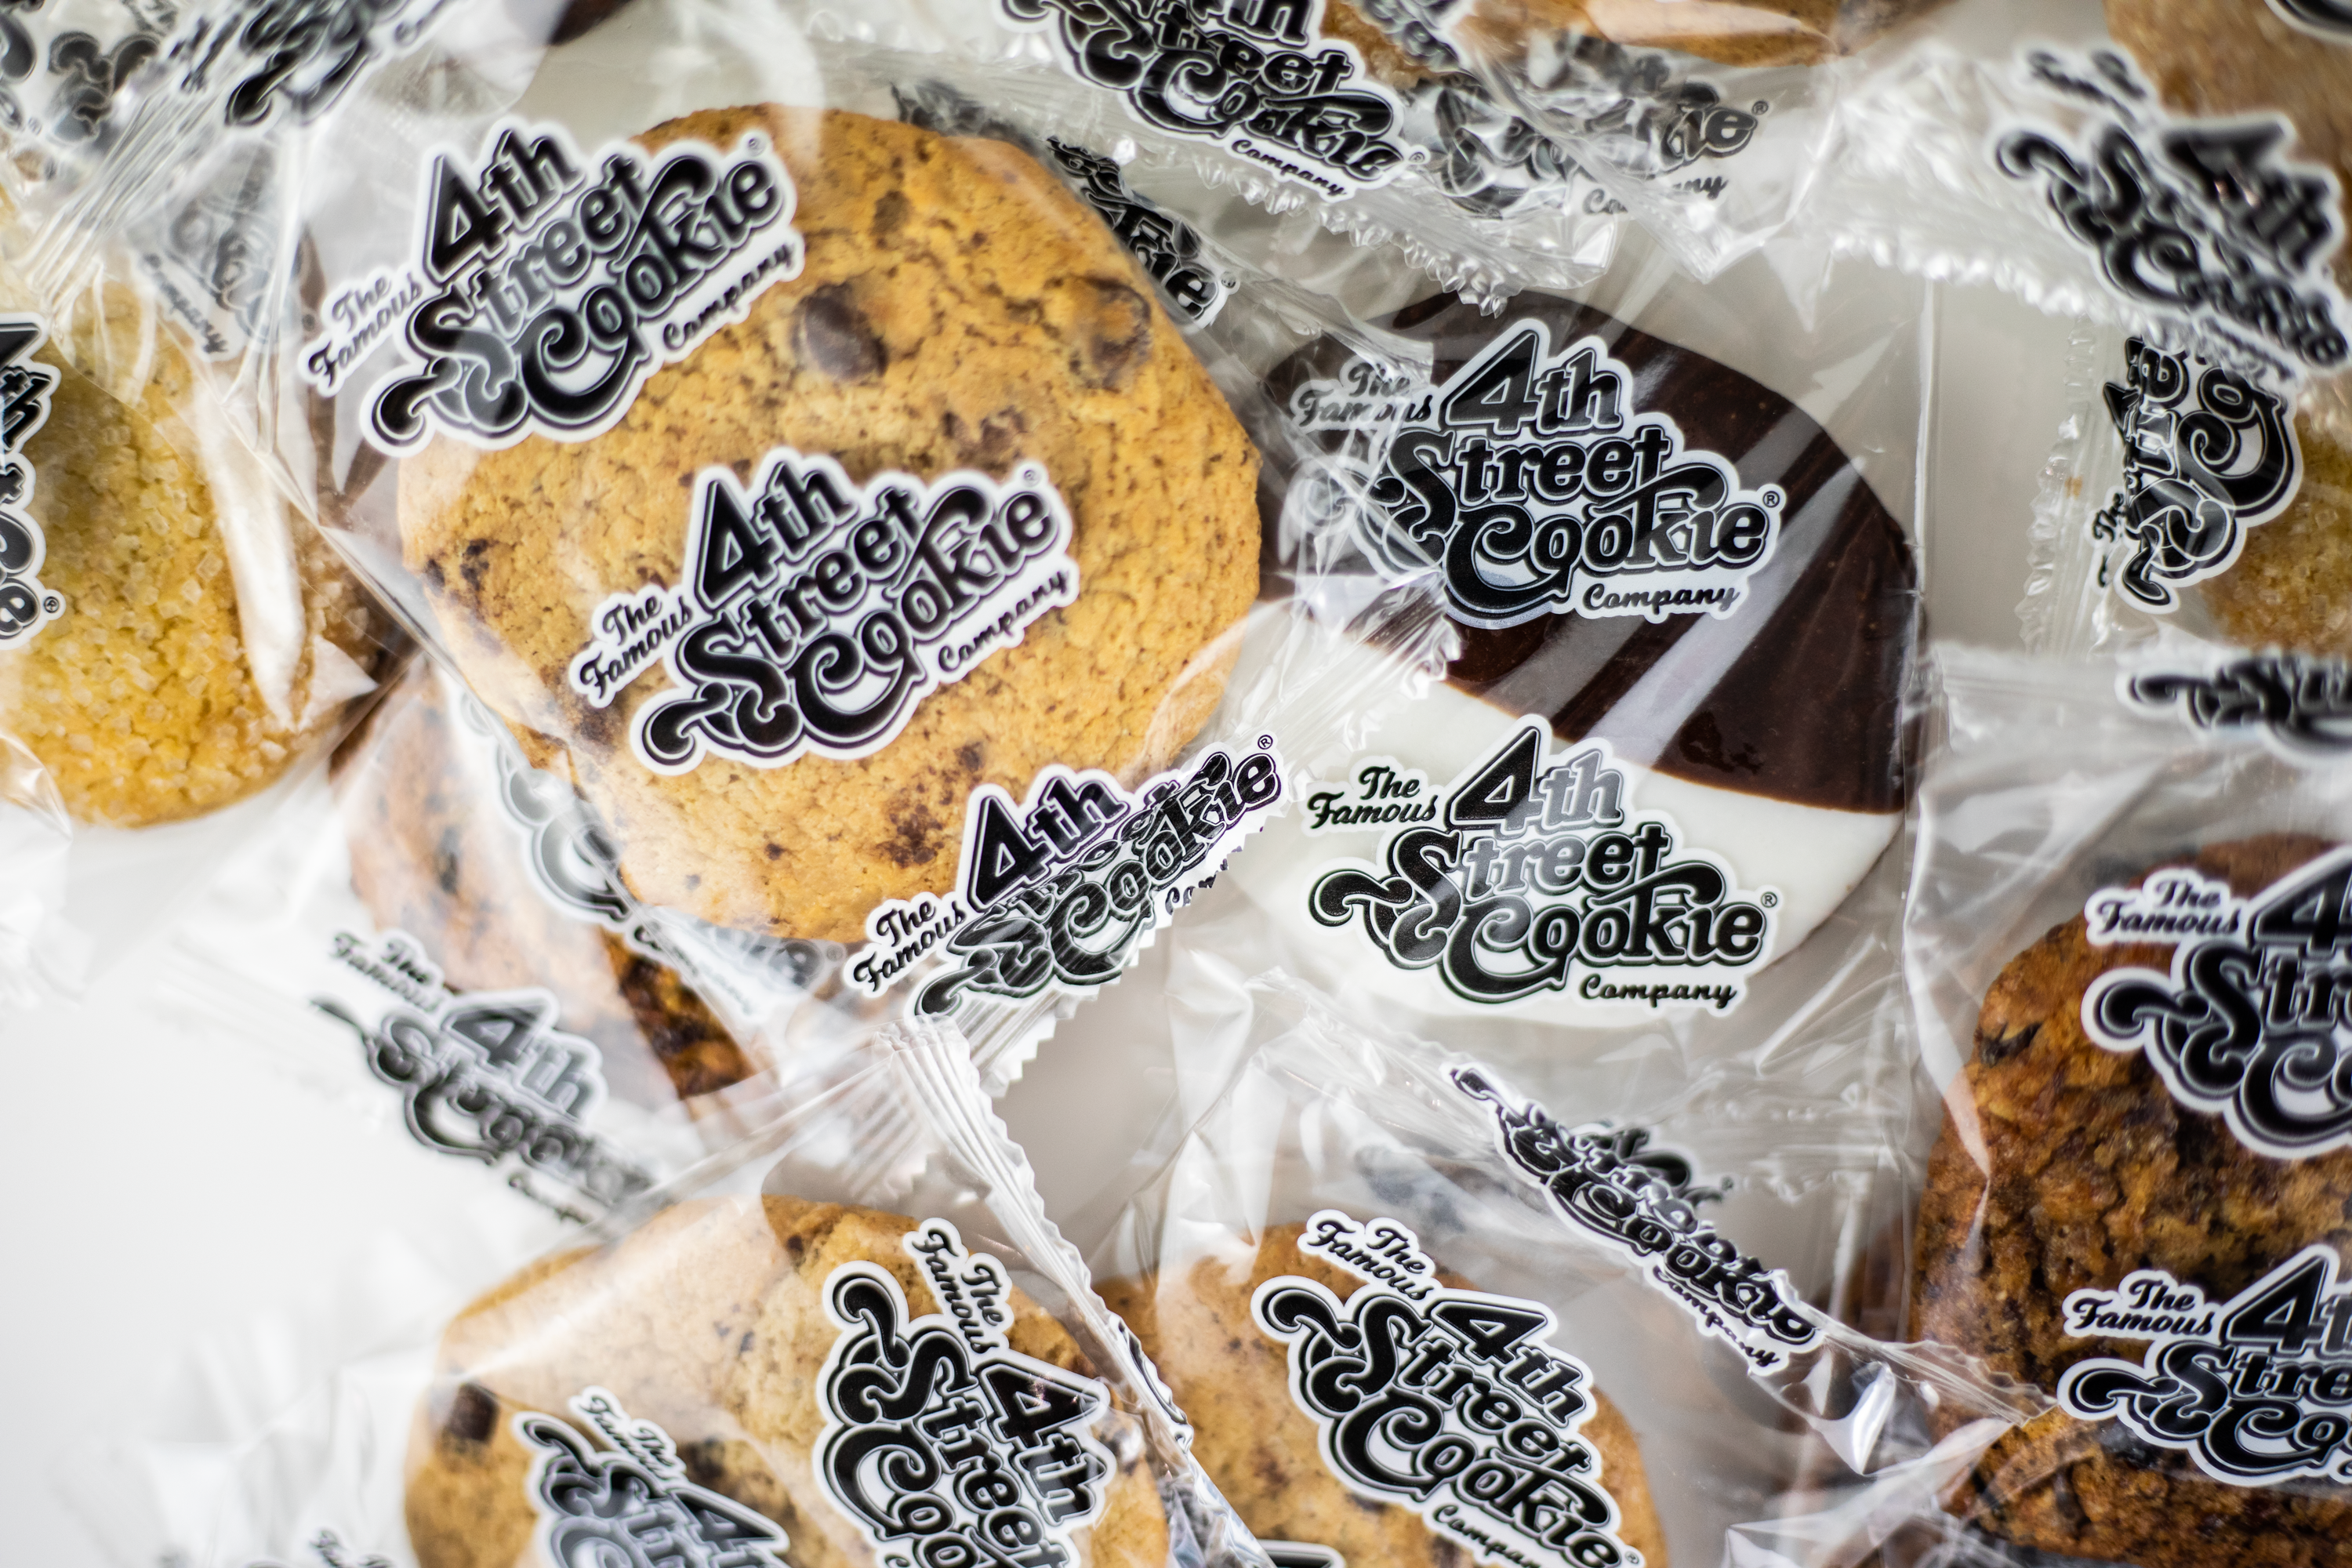 https://famouscookies.com/wp-content/uploads/2021/01/Packaged-Cookies-Banner.png